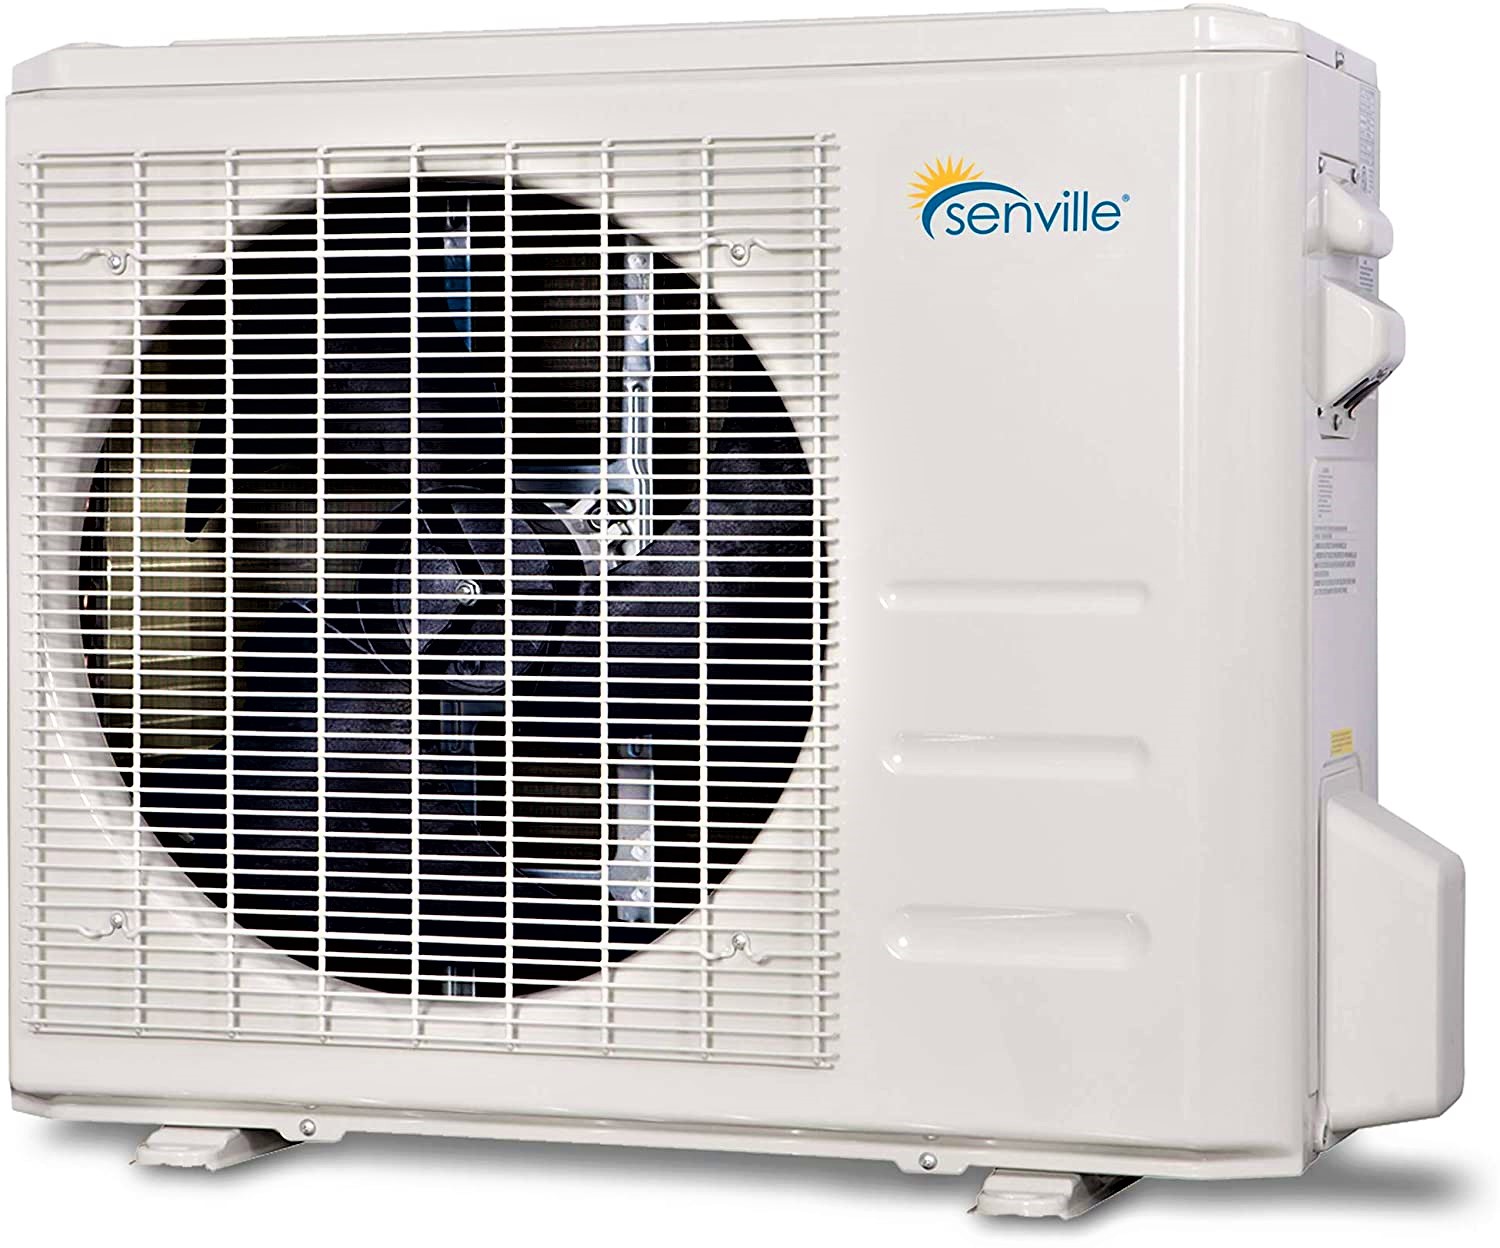 10 Best Air Conditioners for Your Hot Garage 2022 Review: Portable/ Split AC List Fits for Higher Temperature All In One Cooling Gear Lab: Any Refrigerators Air Conditioners Freezers Ice Makers Coolers Fans Reviewed And Compared.